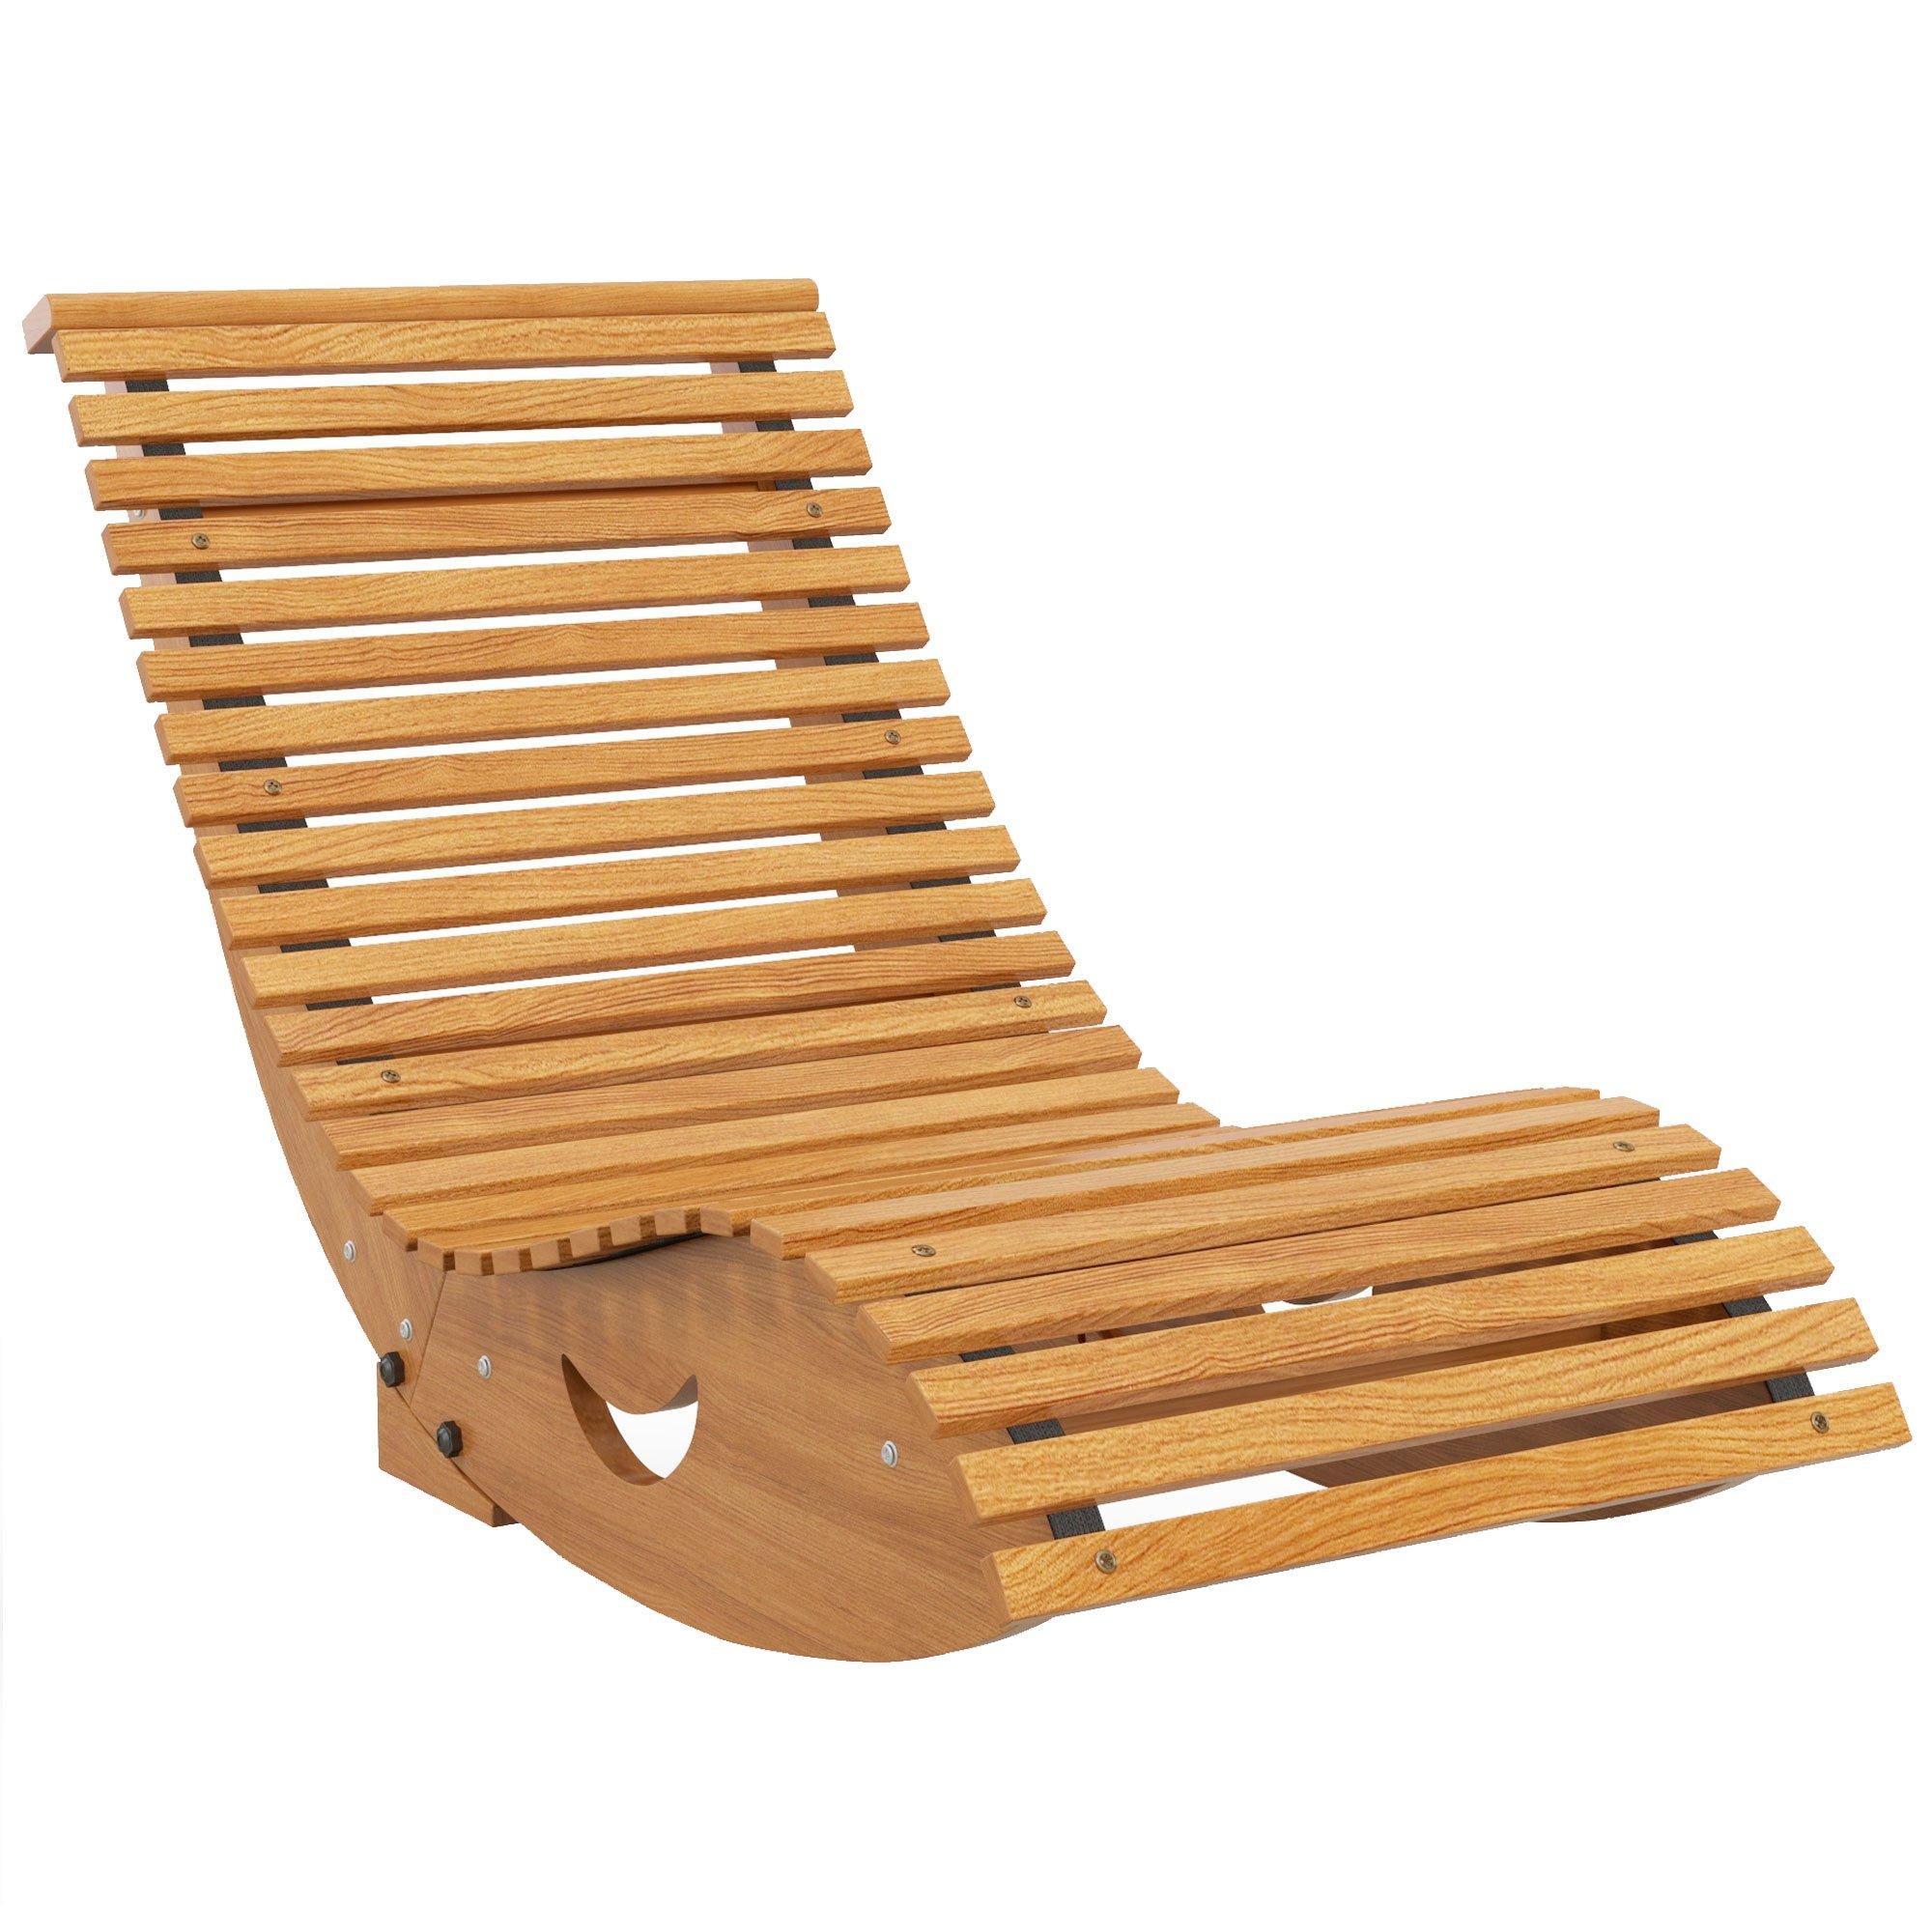 Garden Rocking Chair with Slatted Seat & High Back, Wooden Rocking Chair, Teak